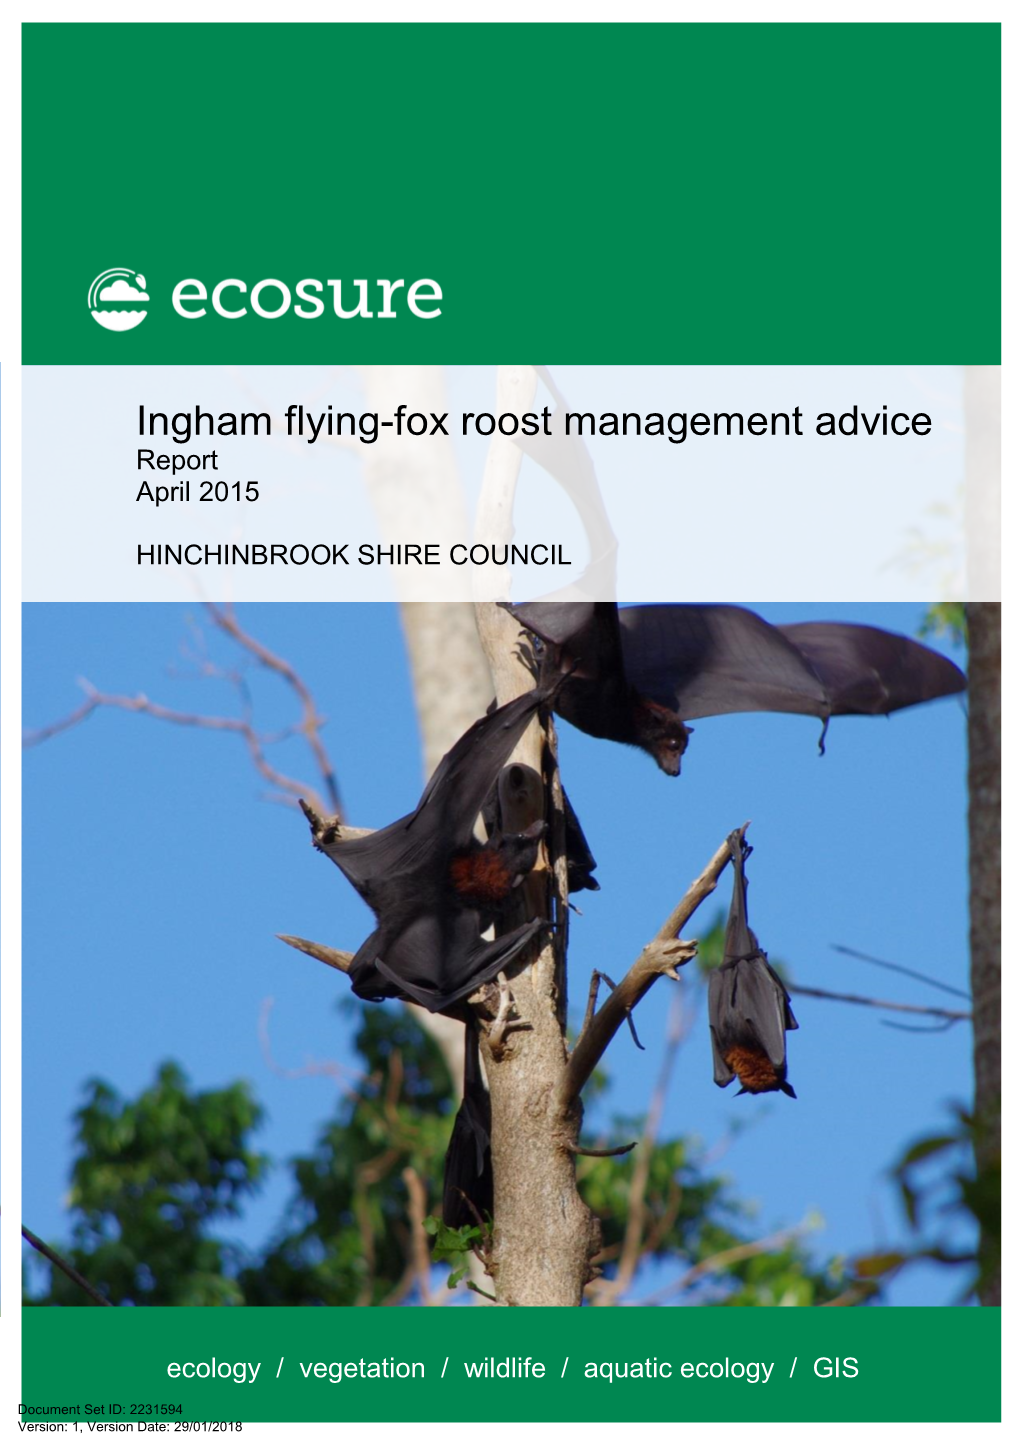 Ingham Flying-Fox Roost Management Advice Report April 2015